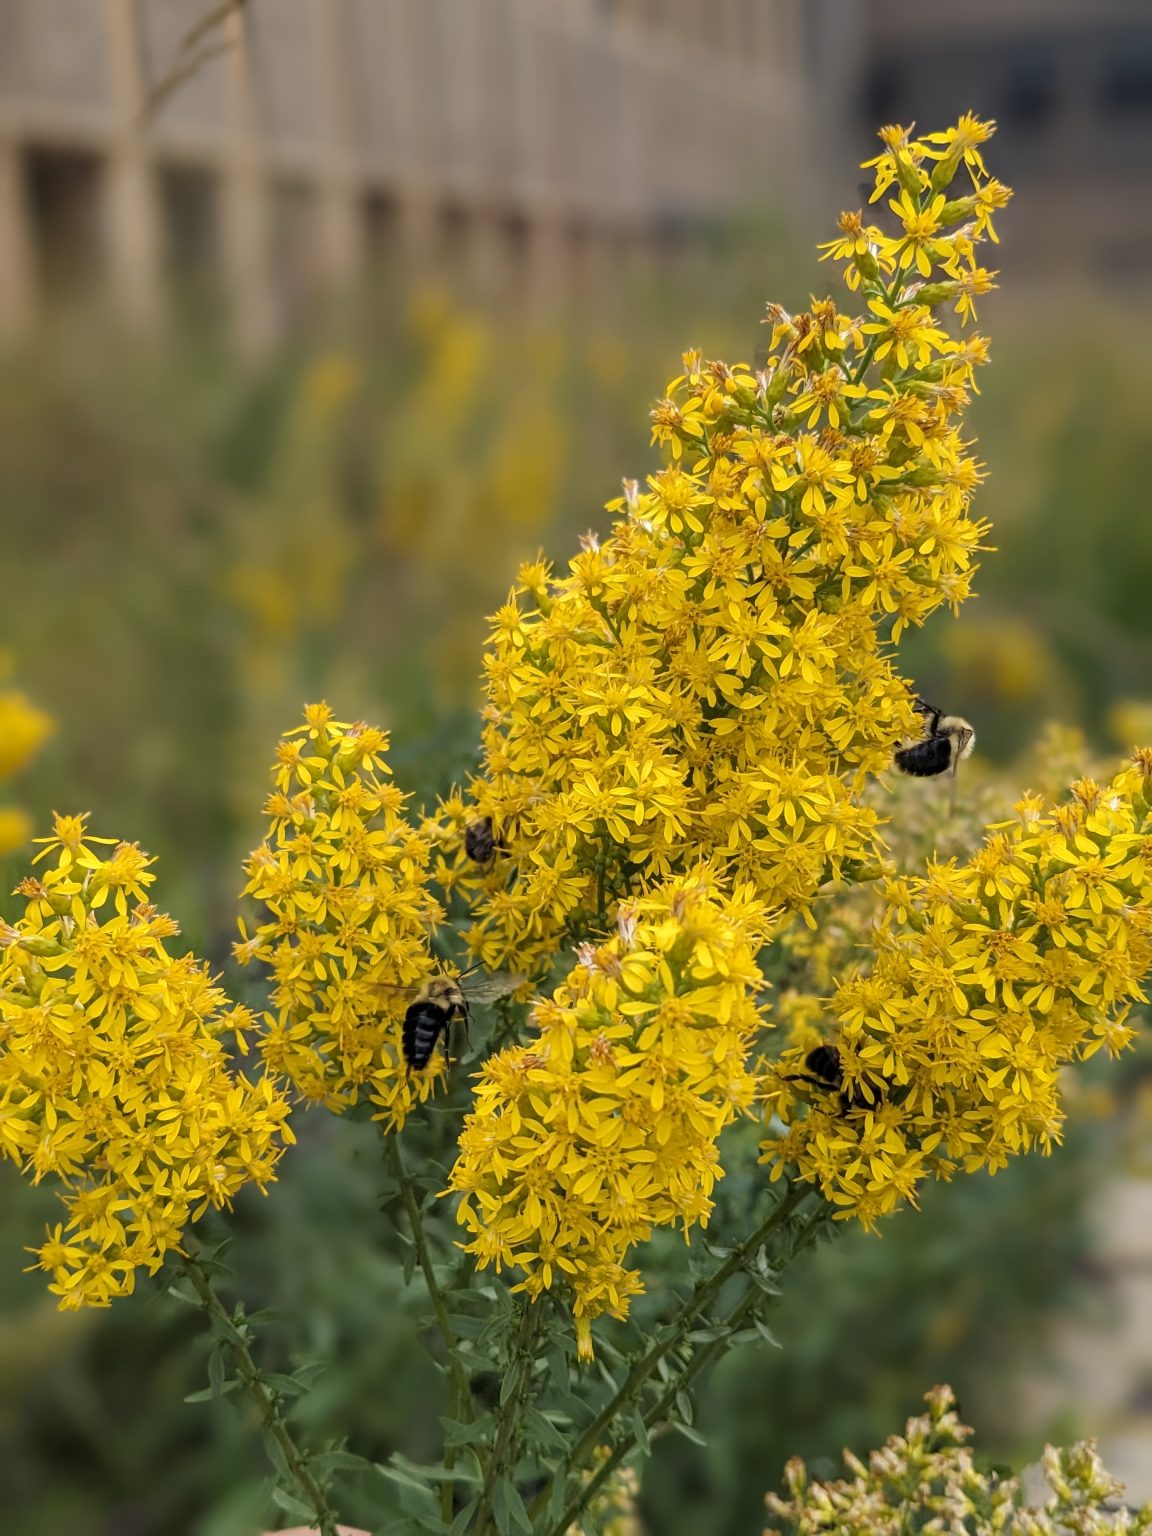 Great for pollinators and with roots that go down 10-15 ft., amazing for rain gardens!